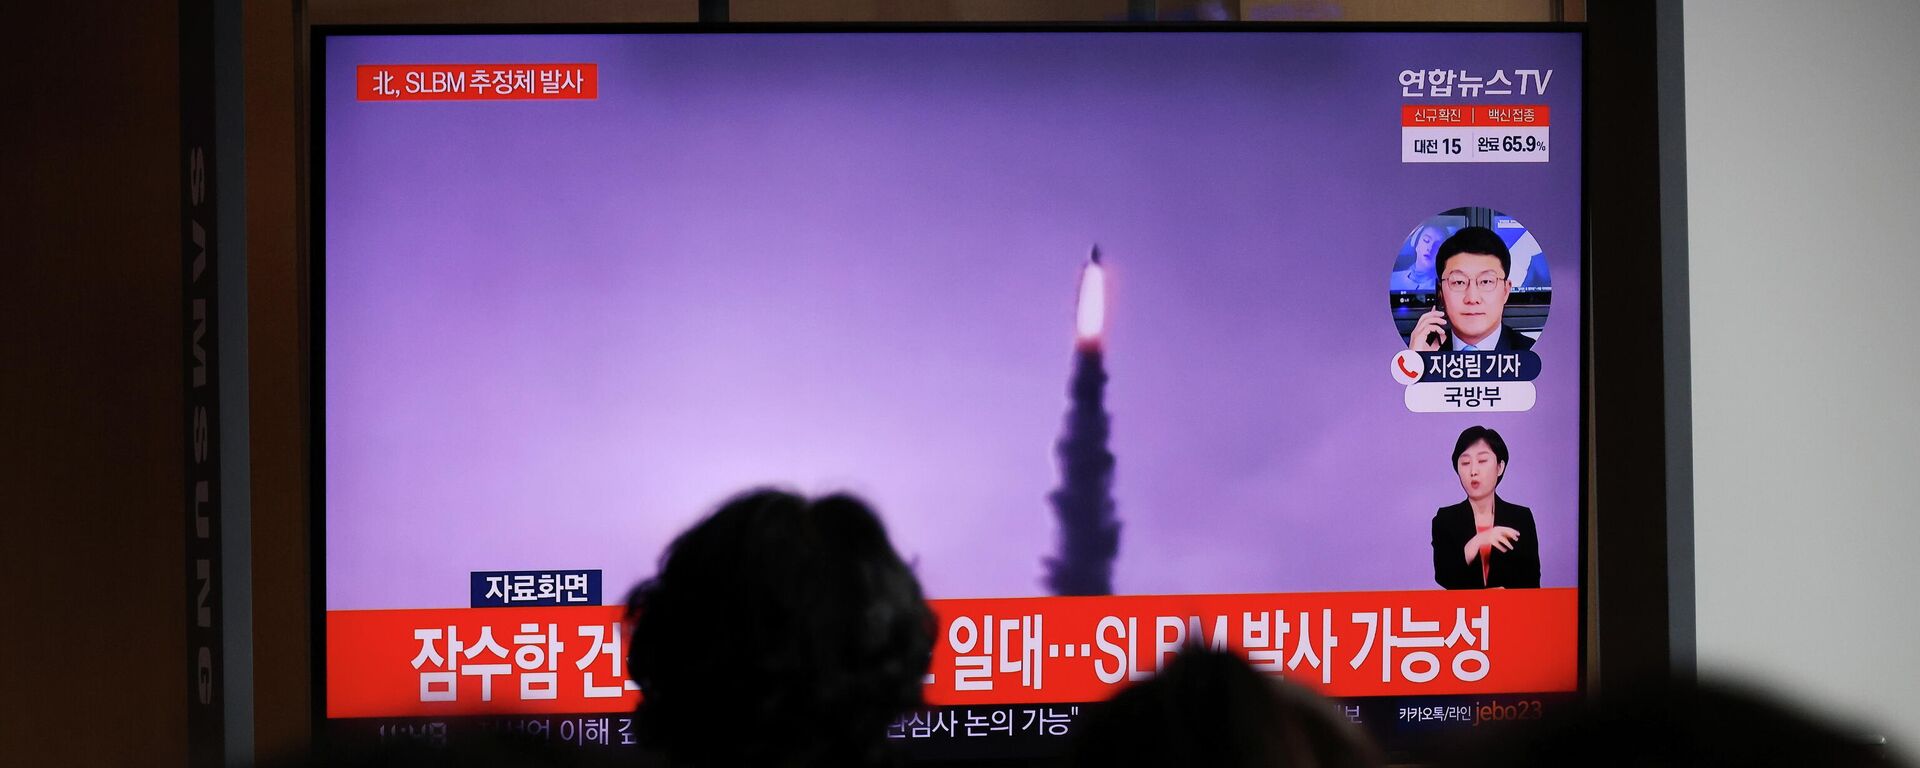 People watch a TV broadcasting file footage of a news report on North Korea firing a ballistic missile off its east coast, in Seoul, South Korea, October 19, 2021.  - Sputnik International, 1920, 19.10.2021